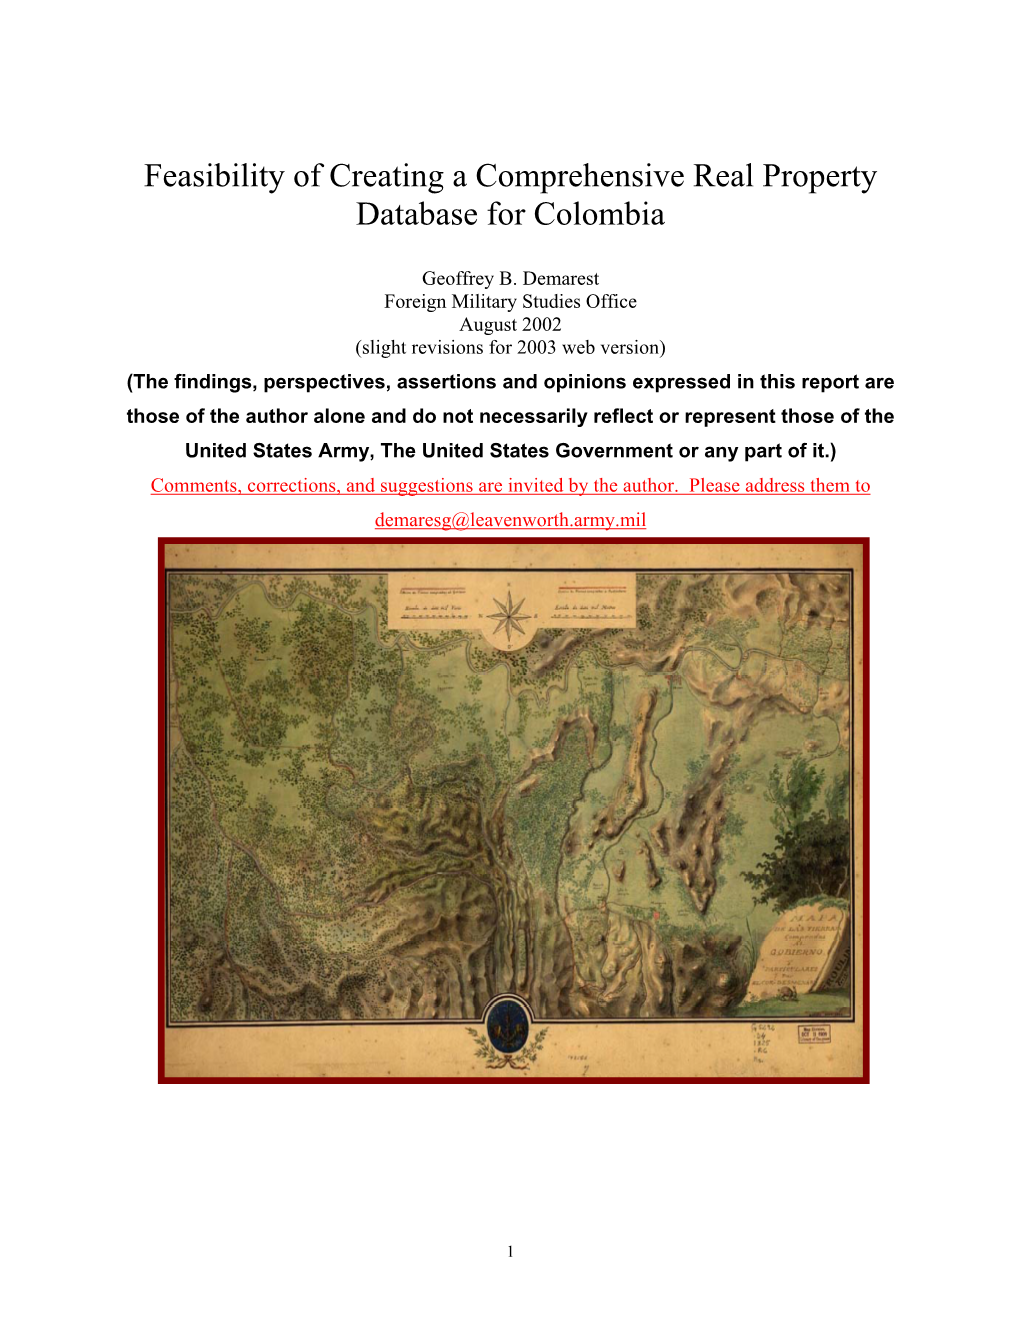 Feasibility of Establishing a Comprehensive GIS Property Ownership Data Base for Colombia